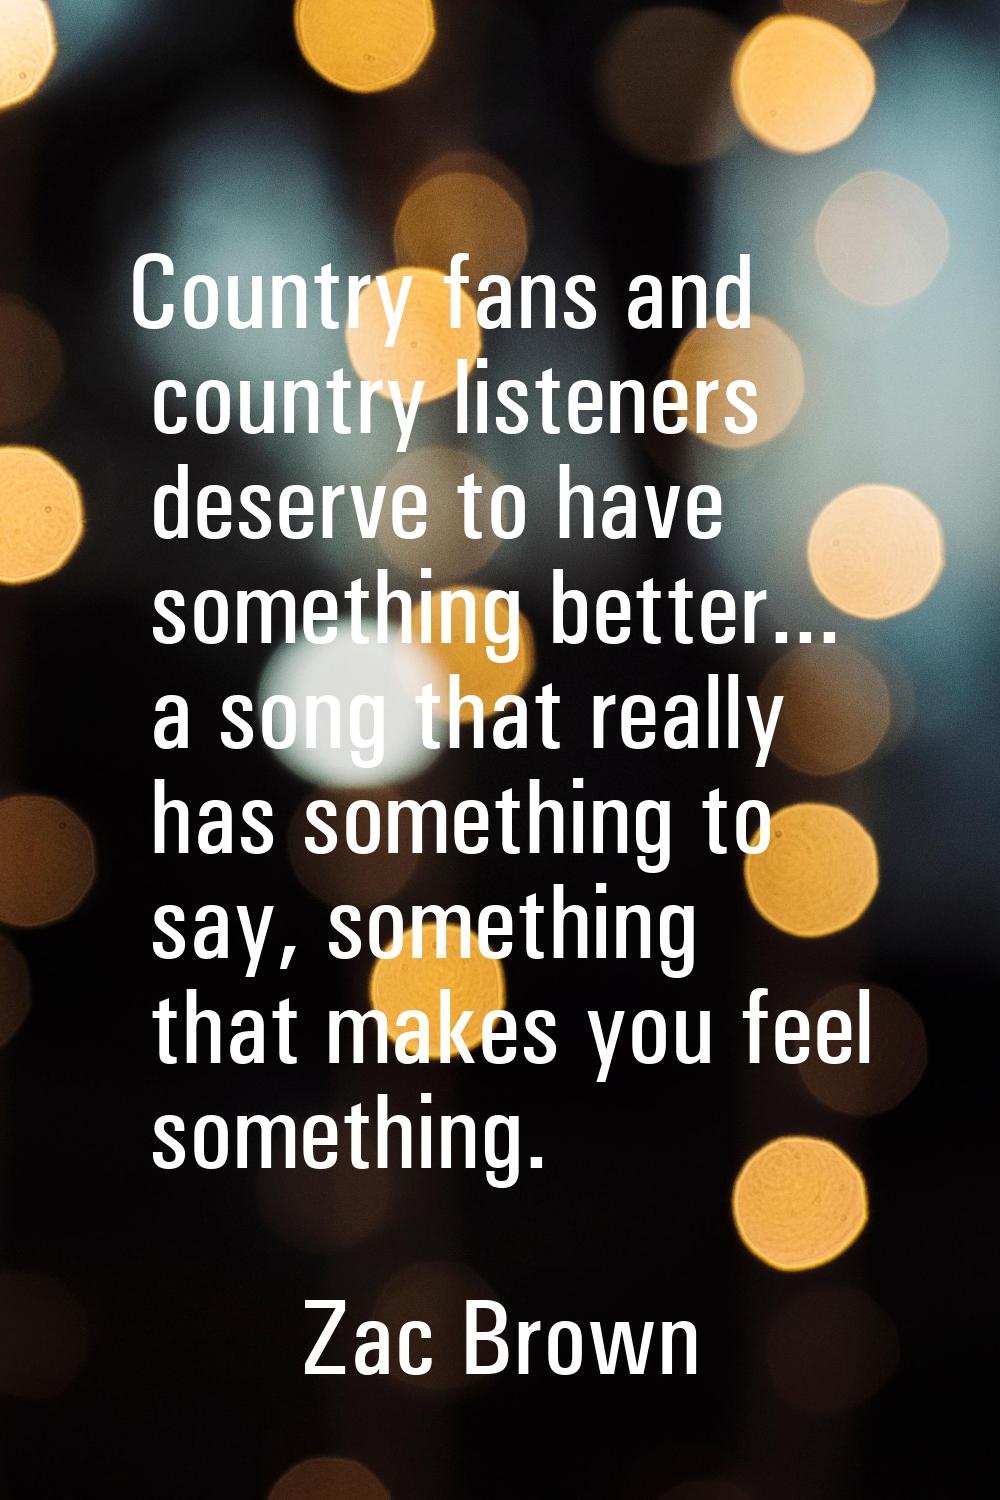 Country fans and country listeners deserve to have something better... a song that really has somet